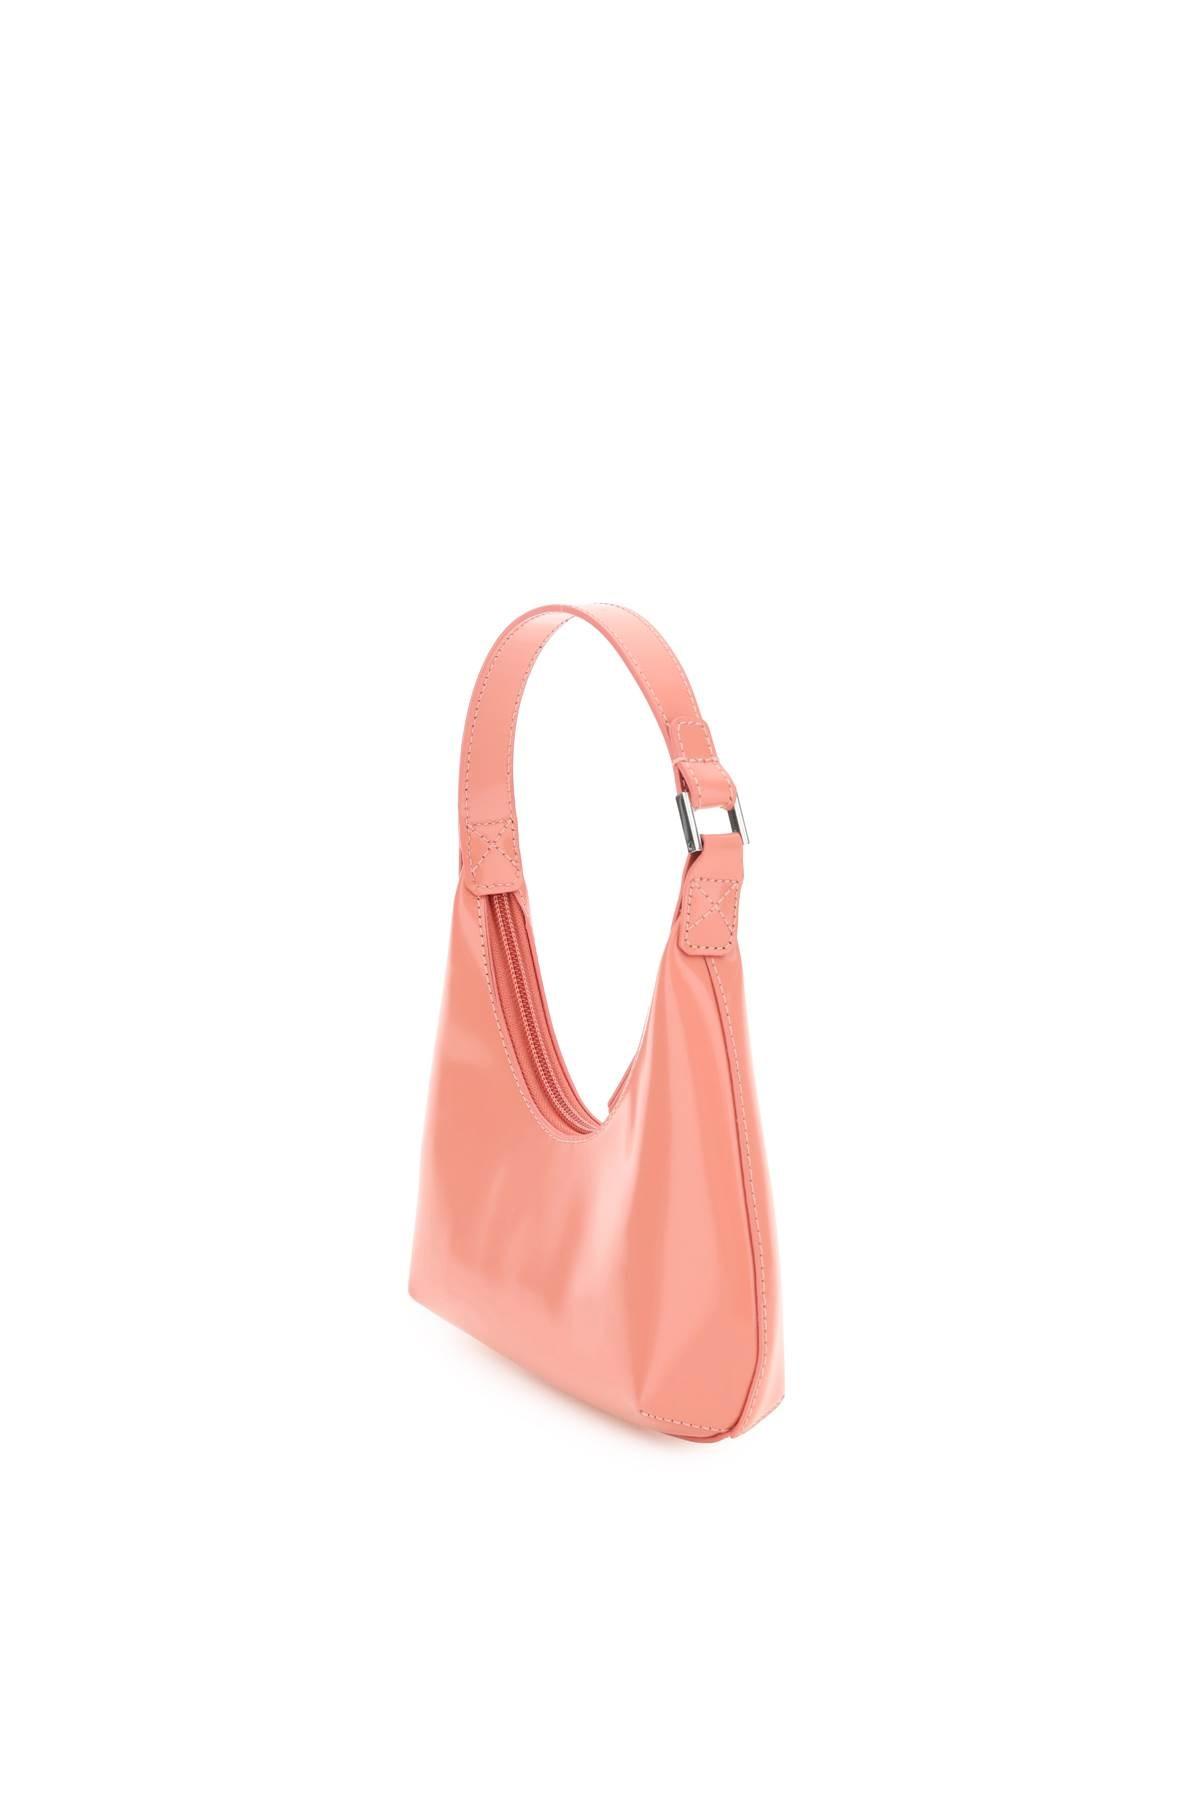 BY FAR Amber Bag in Pink | Lyst